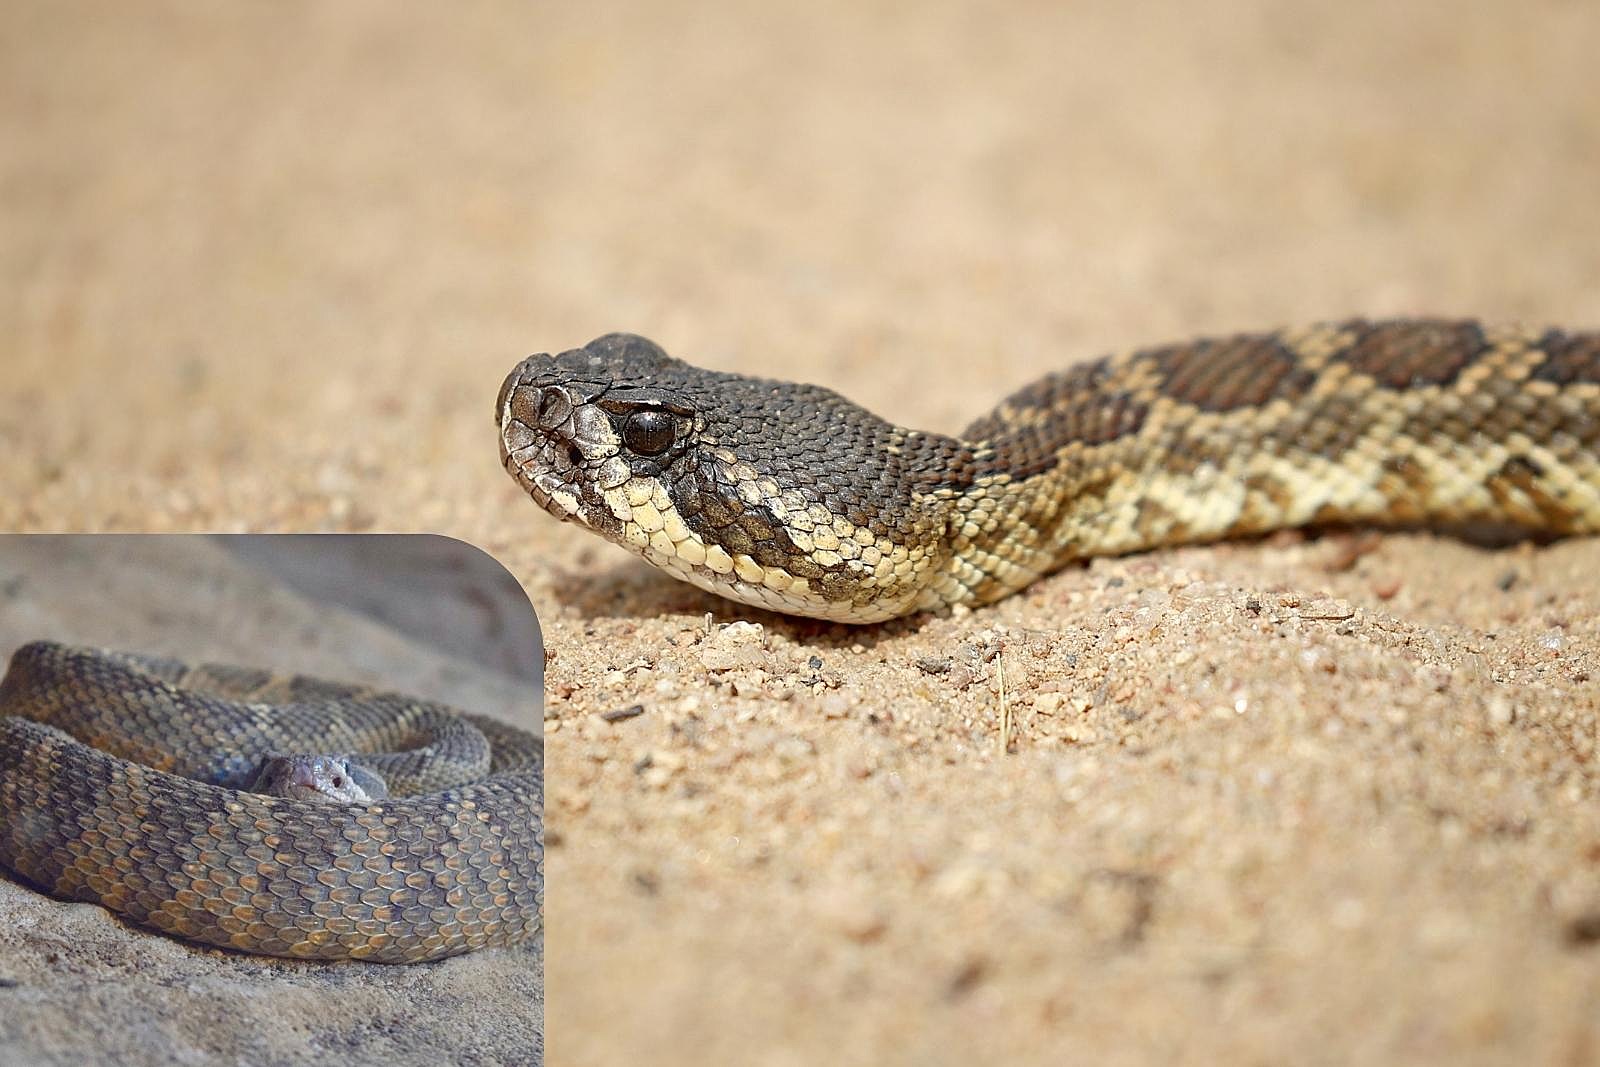 A Northern Pacific Rattlesnake